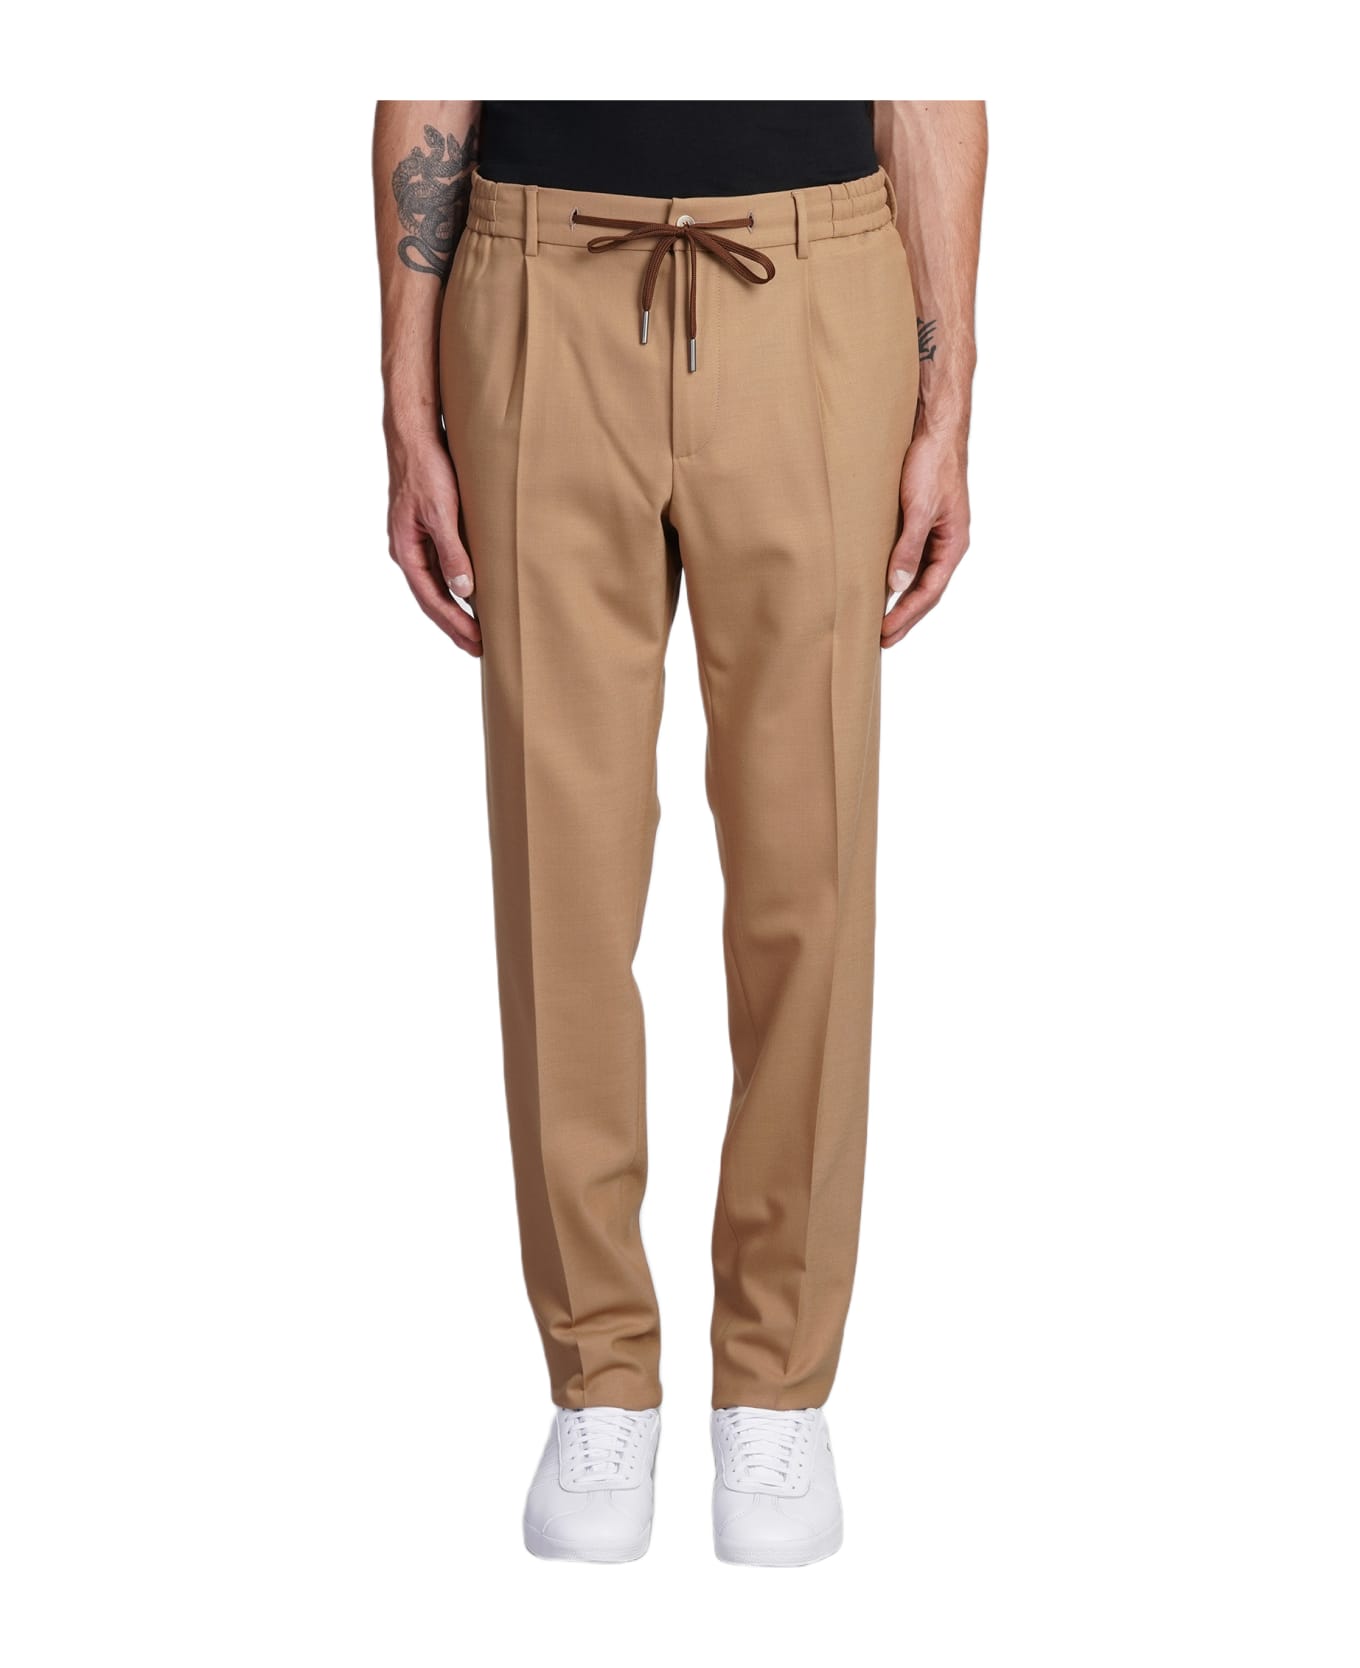 Tagliatore 0205 Pants In Camel Polyester - Camel